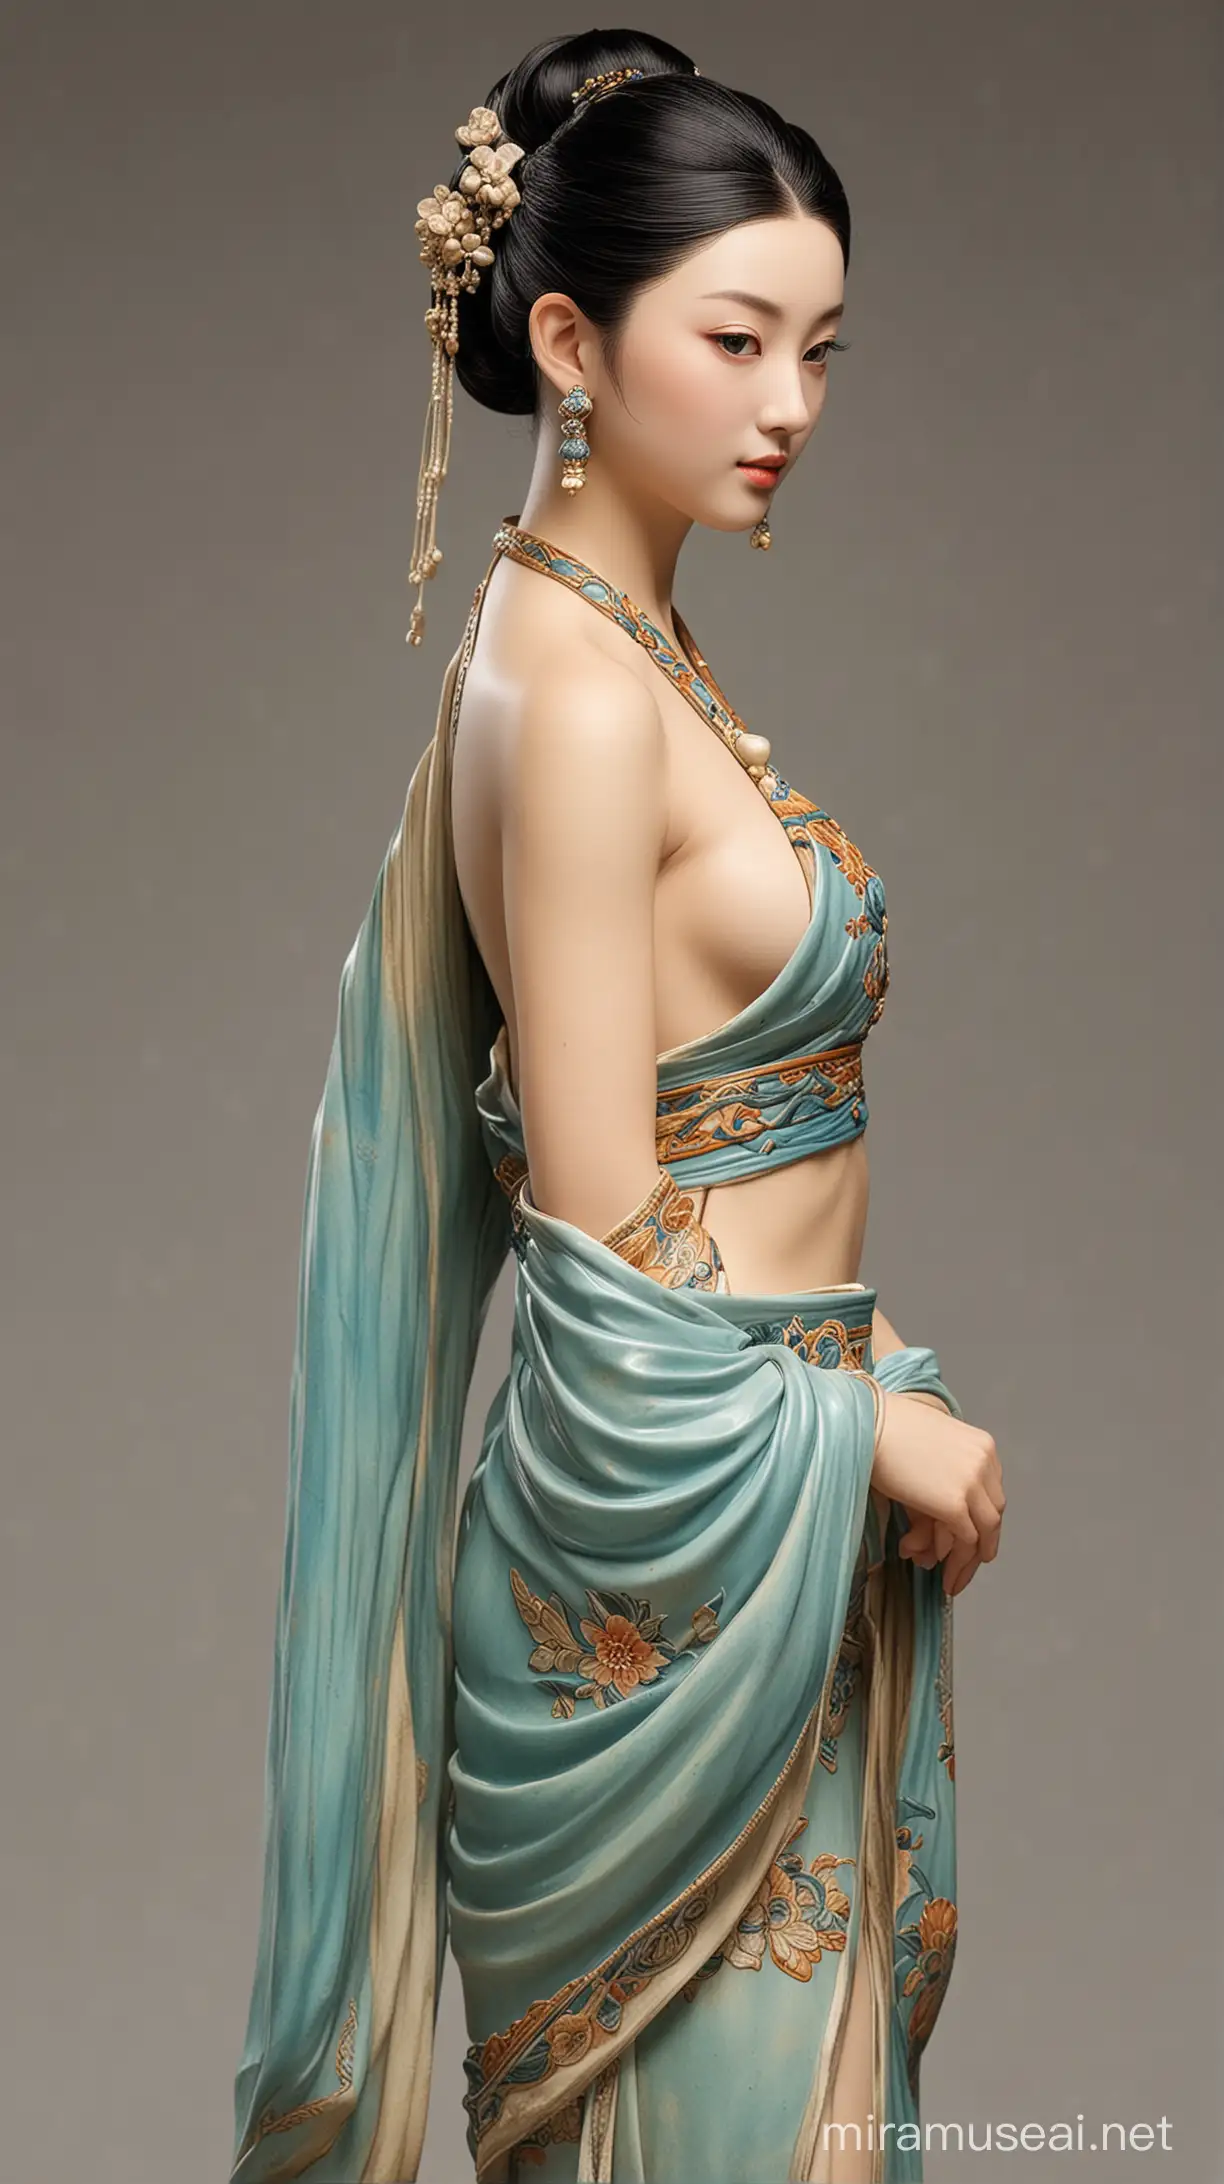 Tang Dynasty Chinese Ceramic Beauty in ShoulderBaring Attire